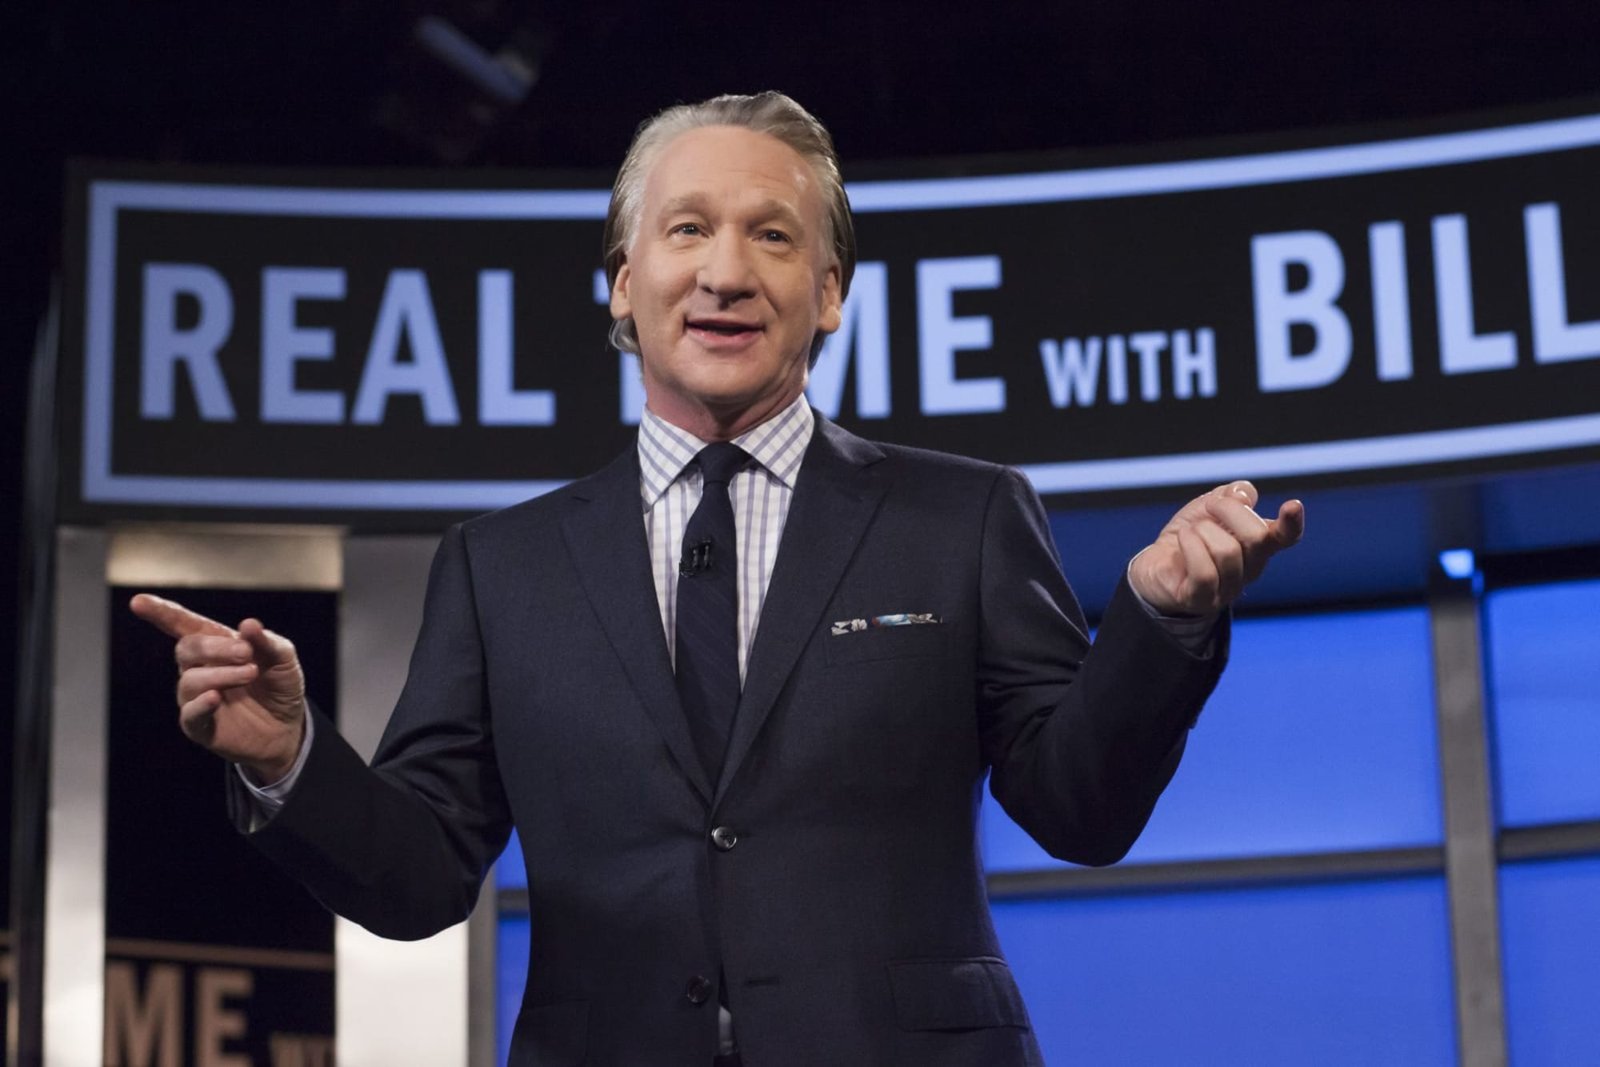 Real Time with Bill Maher Season 21